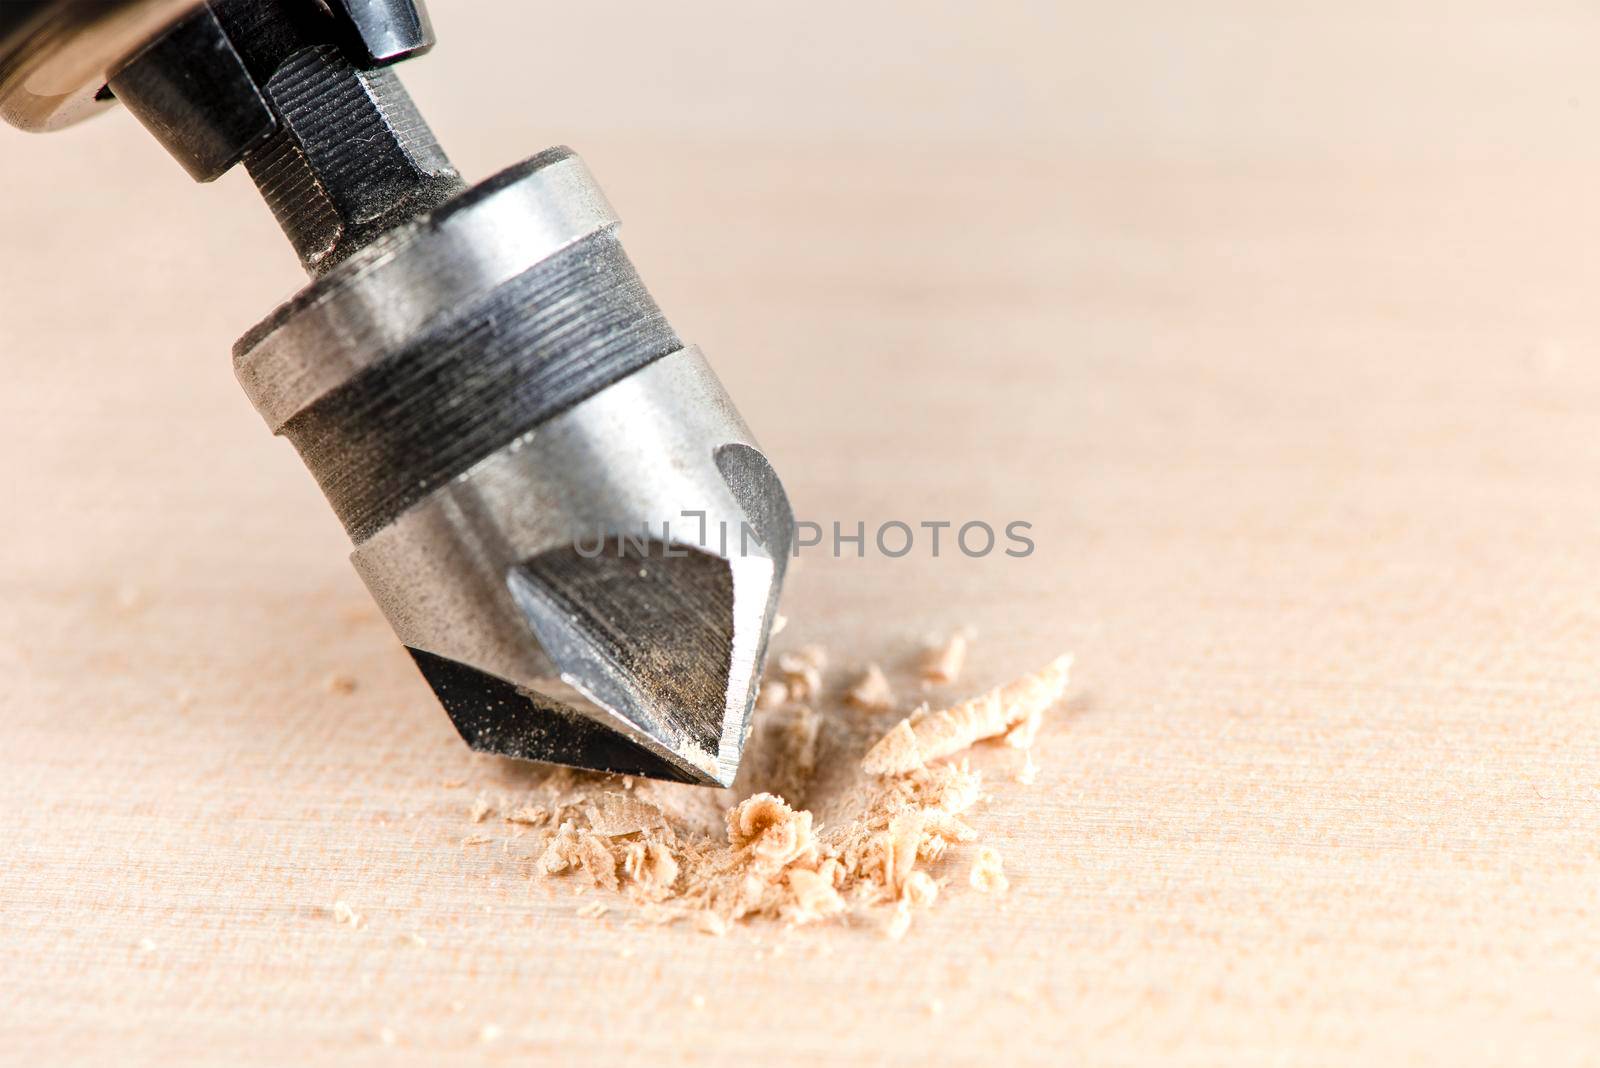 Countersink for deepening the self-tapping screw. A countersink drill makes a recess in a hole for a screw in a wooden board